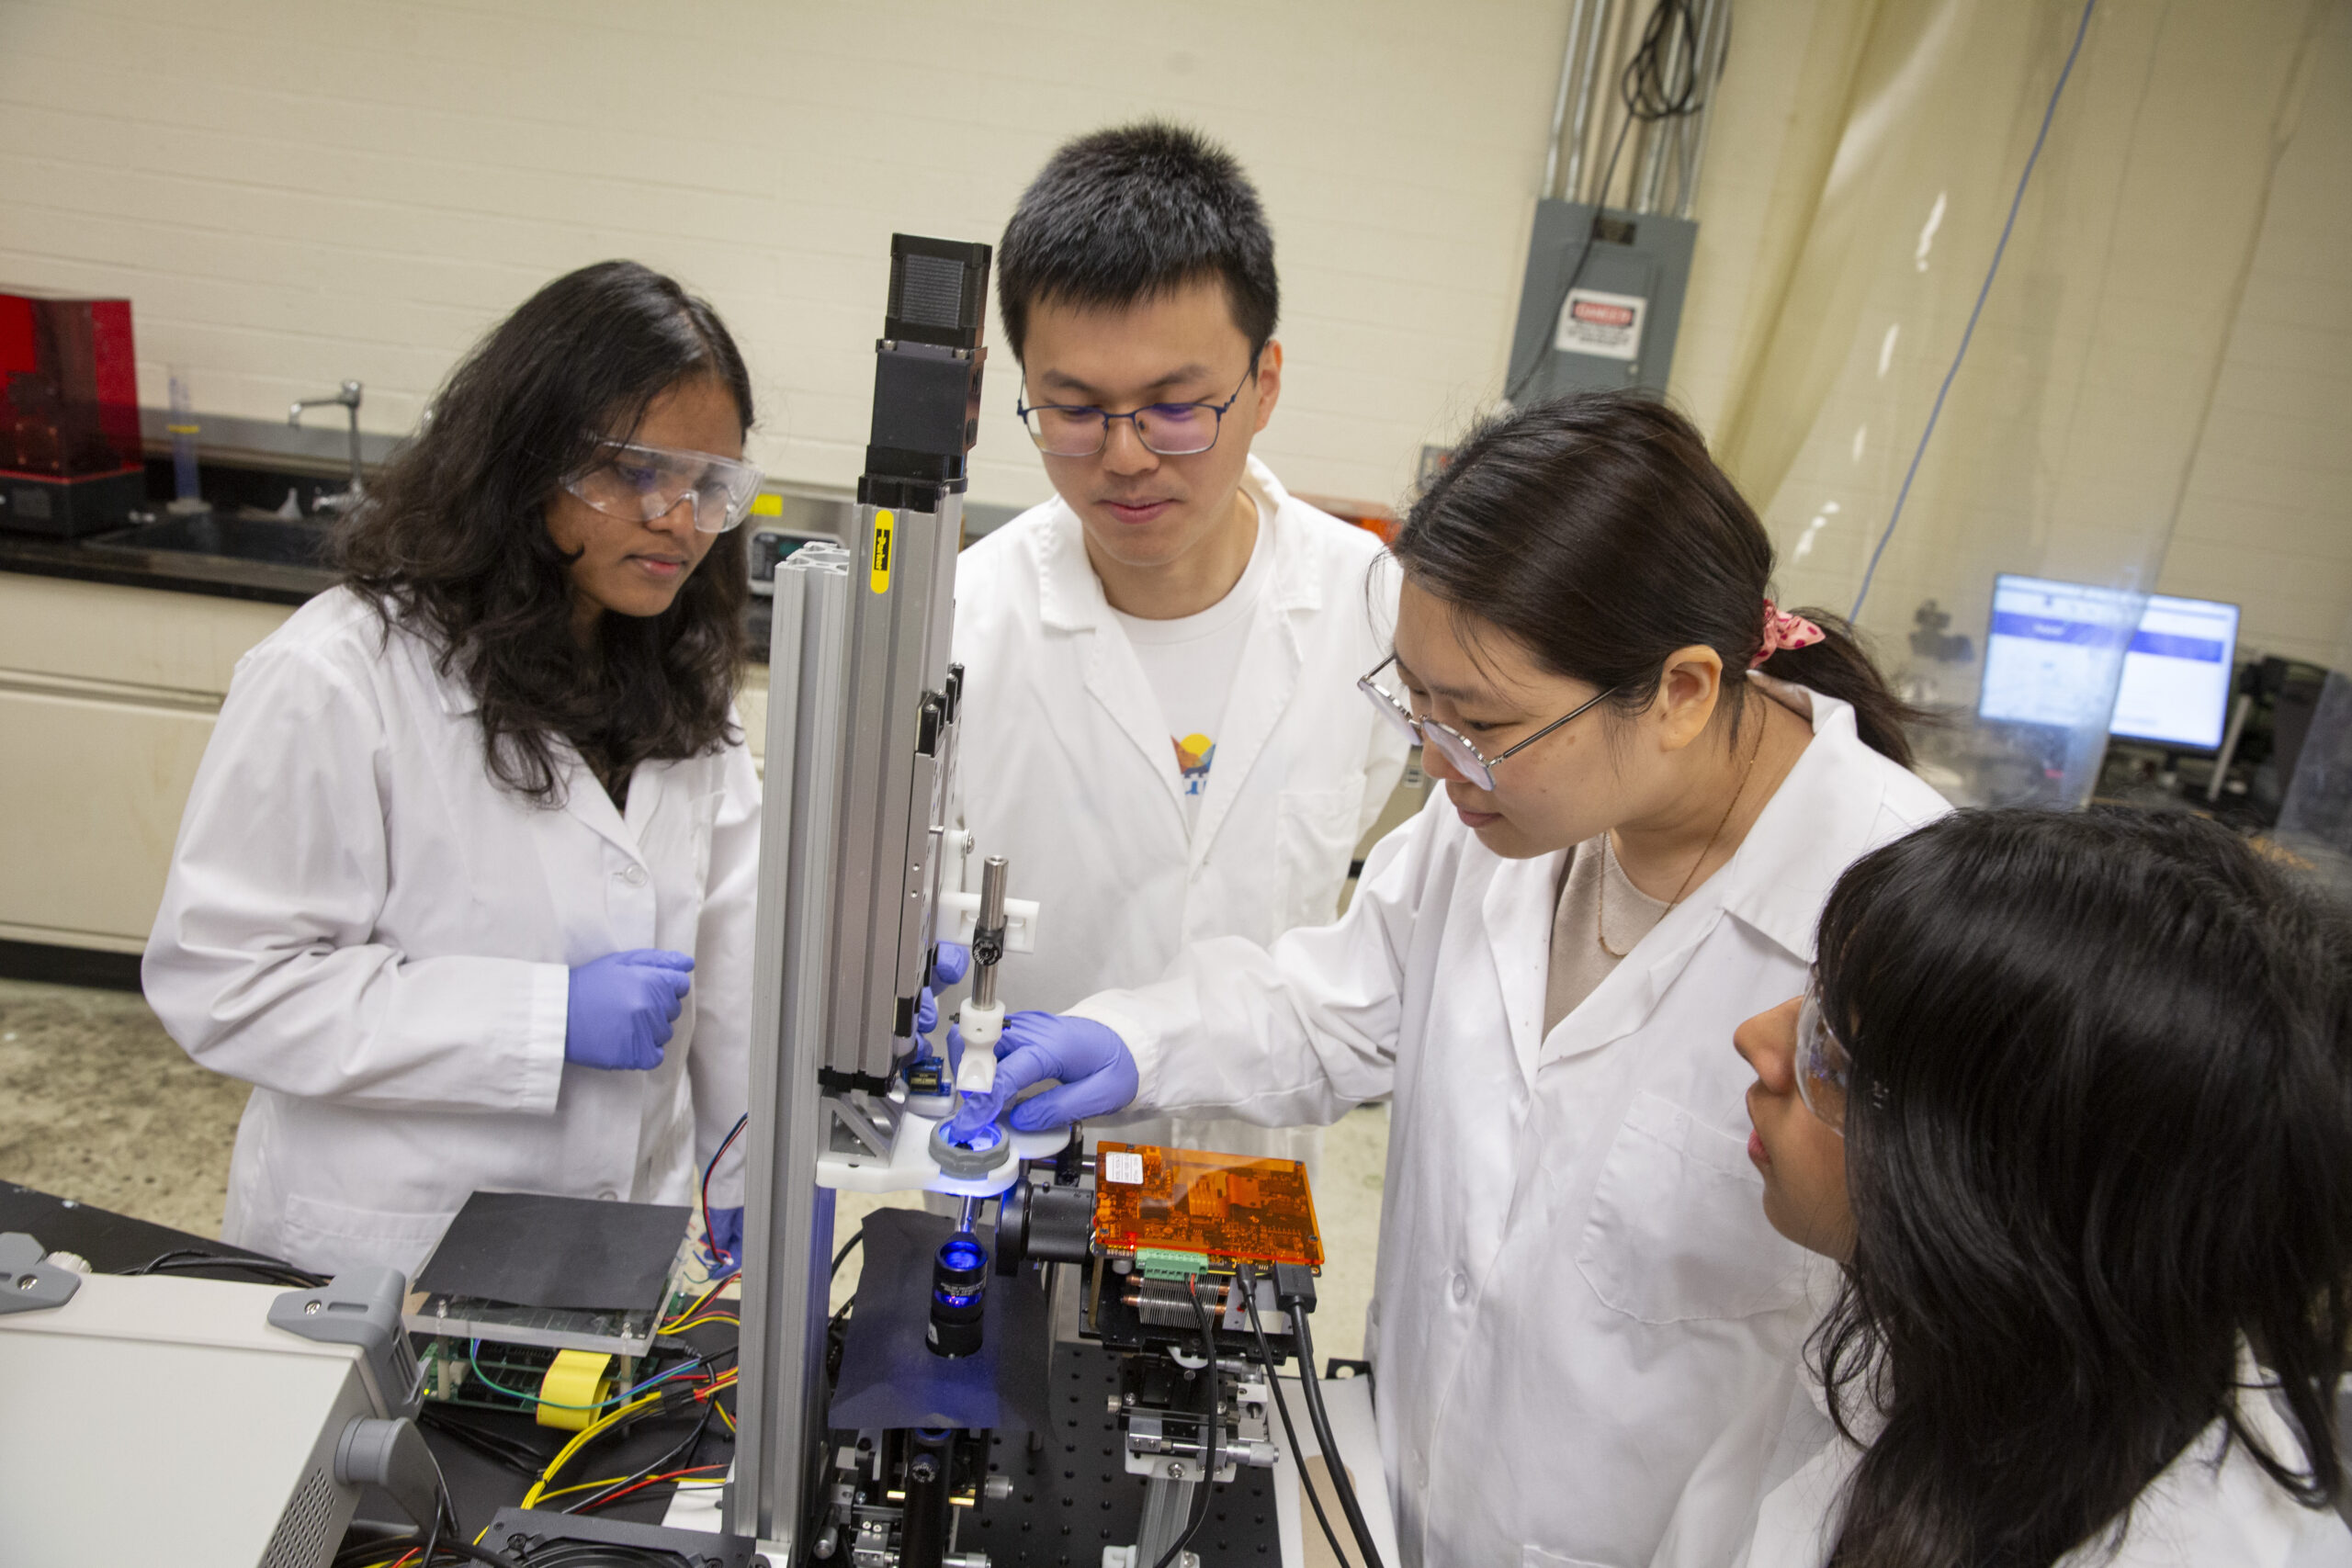  Xiangjia “Cindy” Li (second from right), an assistant professor of aerospace and mechanical engineering in the Ira A. Fulton Schools of Engineering at Arizona State University, in her lab with three of her students. Li received a 2024 National Science Foundation Faculty Early Career Development Program (CAREER) Award for developing a novel approach to printing 3D products with complex designs using both metal and polymer materials. Photographer: Erika Gronek/ASU